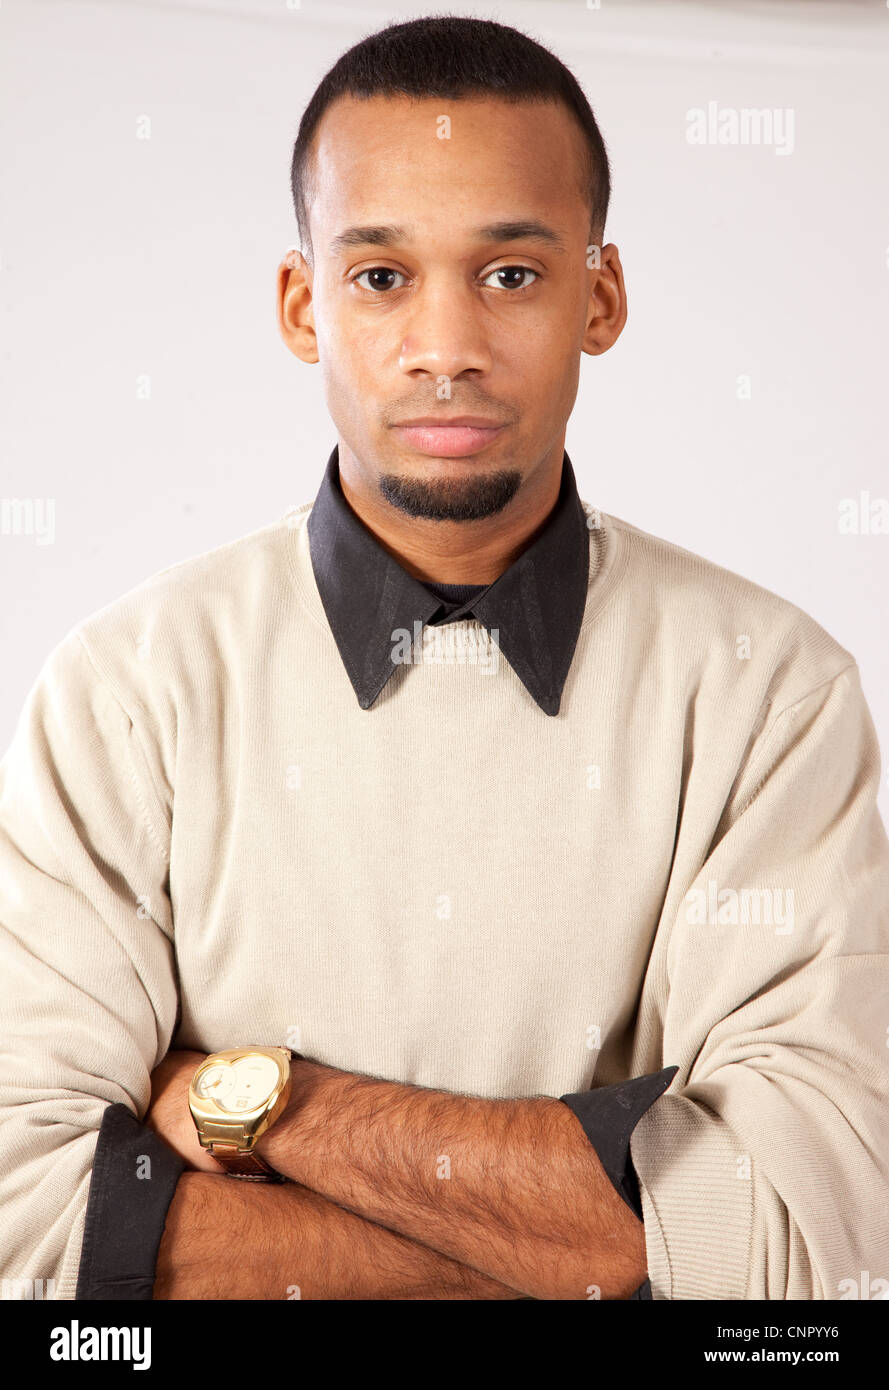 Handsome young black man with pensive expression and arms folded, facing front with a thoughtful expression Stock Photo